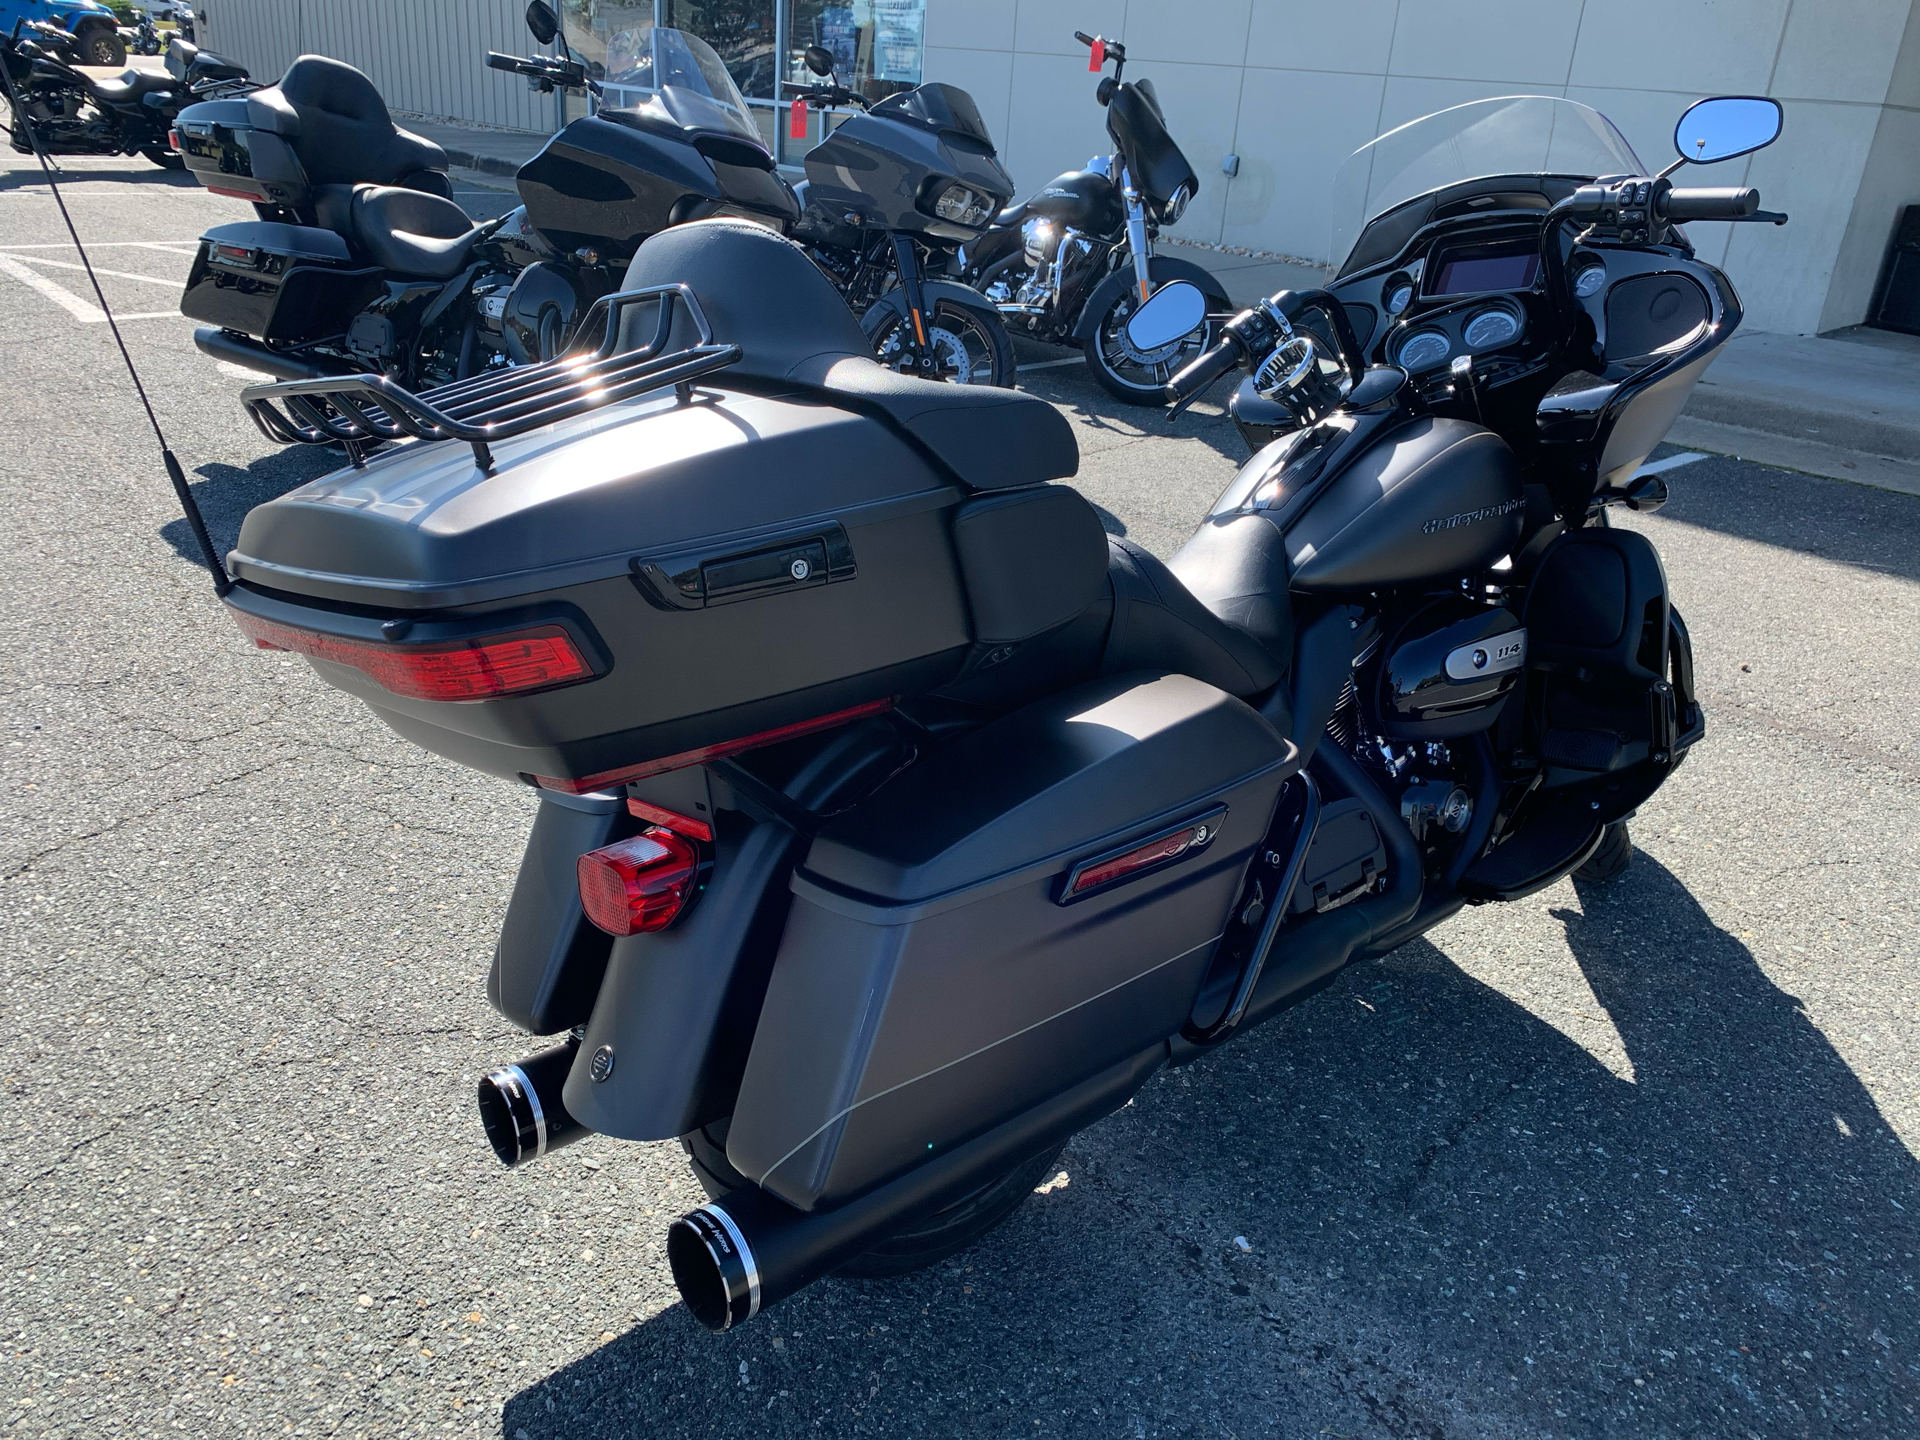 2021 Harley-Davidson ROAD GLIDE LIMITED in Dumfries, Virginia - Photo 2